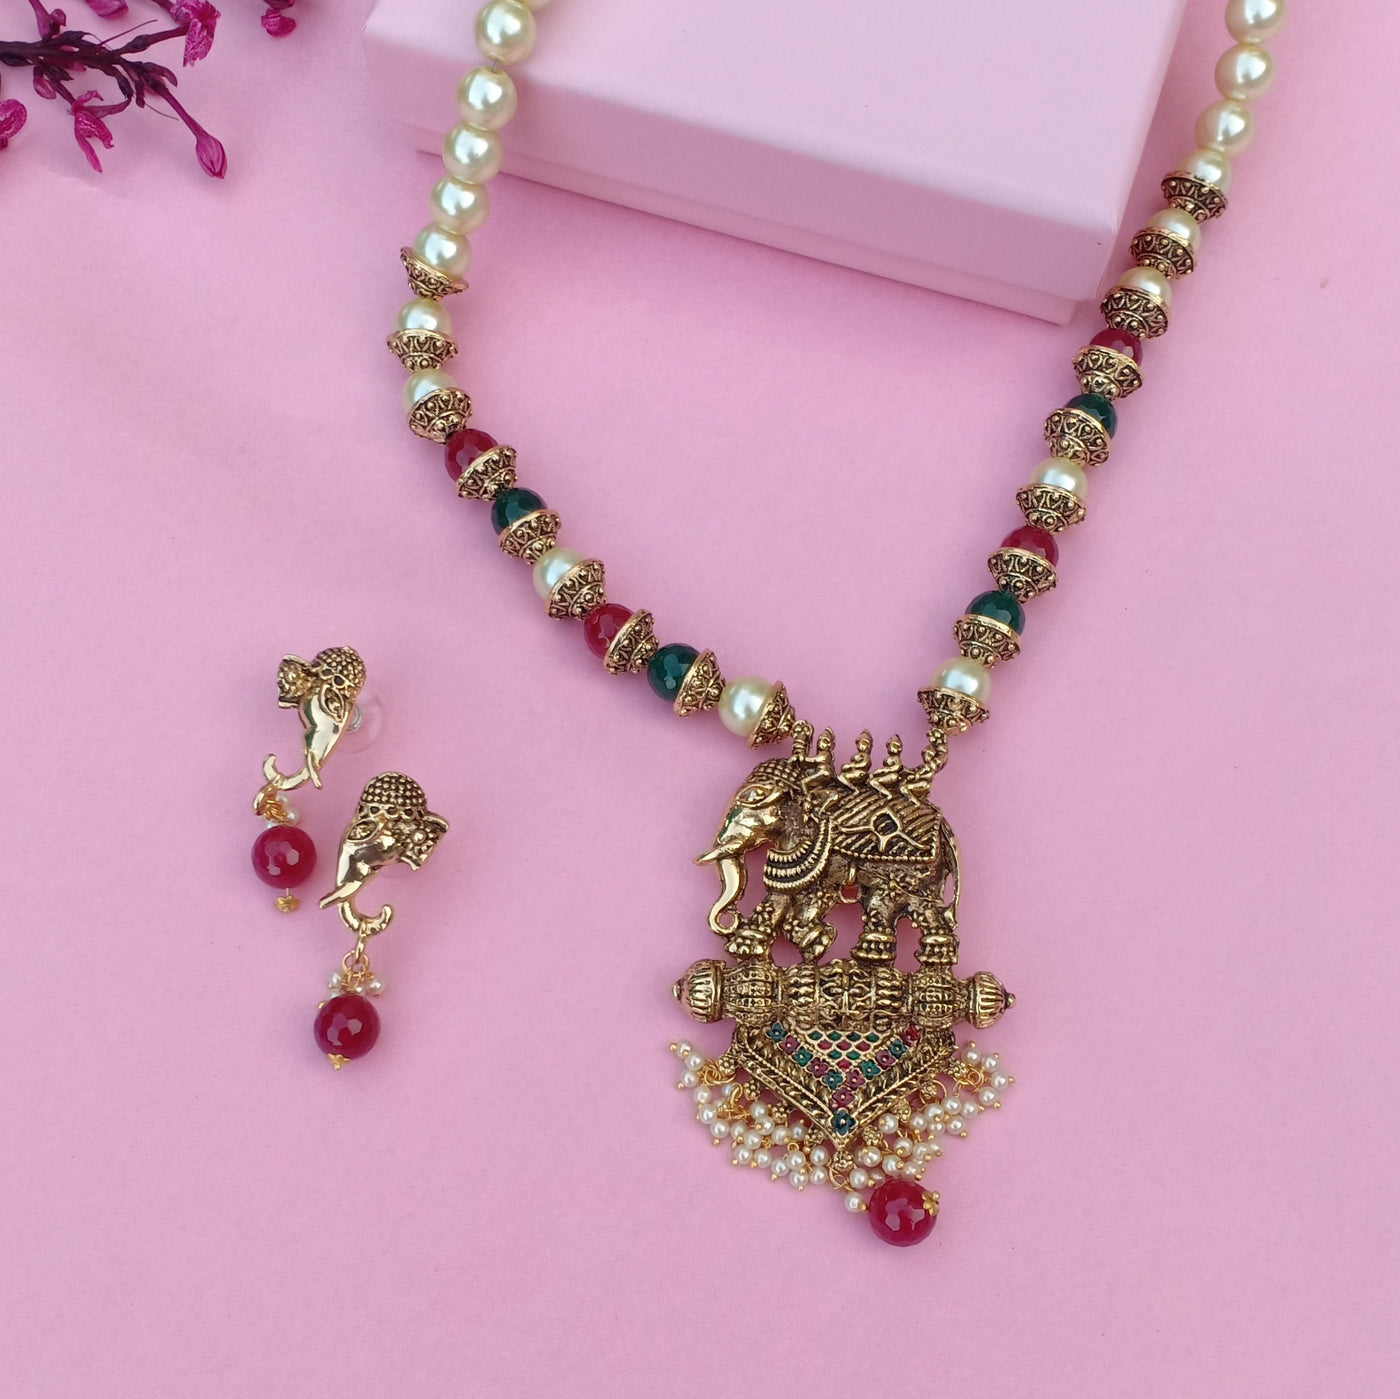 Estele Gold Plated Antique Adorable Elephant Pearl Necklace Set with Beads & Enamel for Women